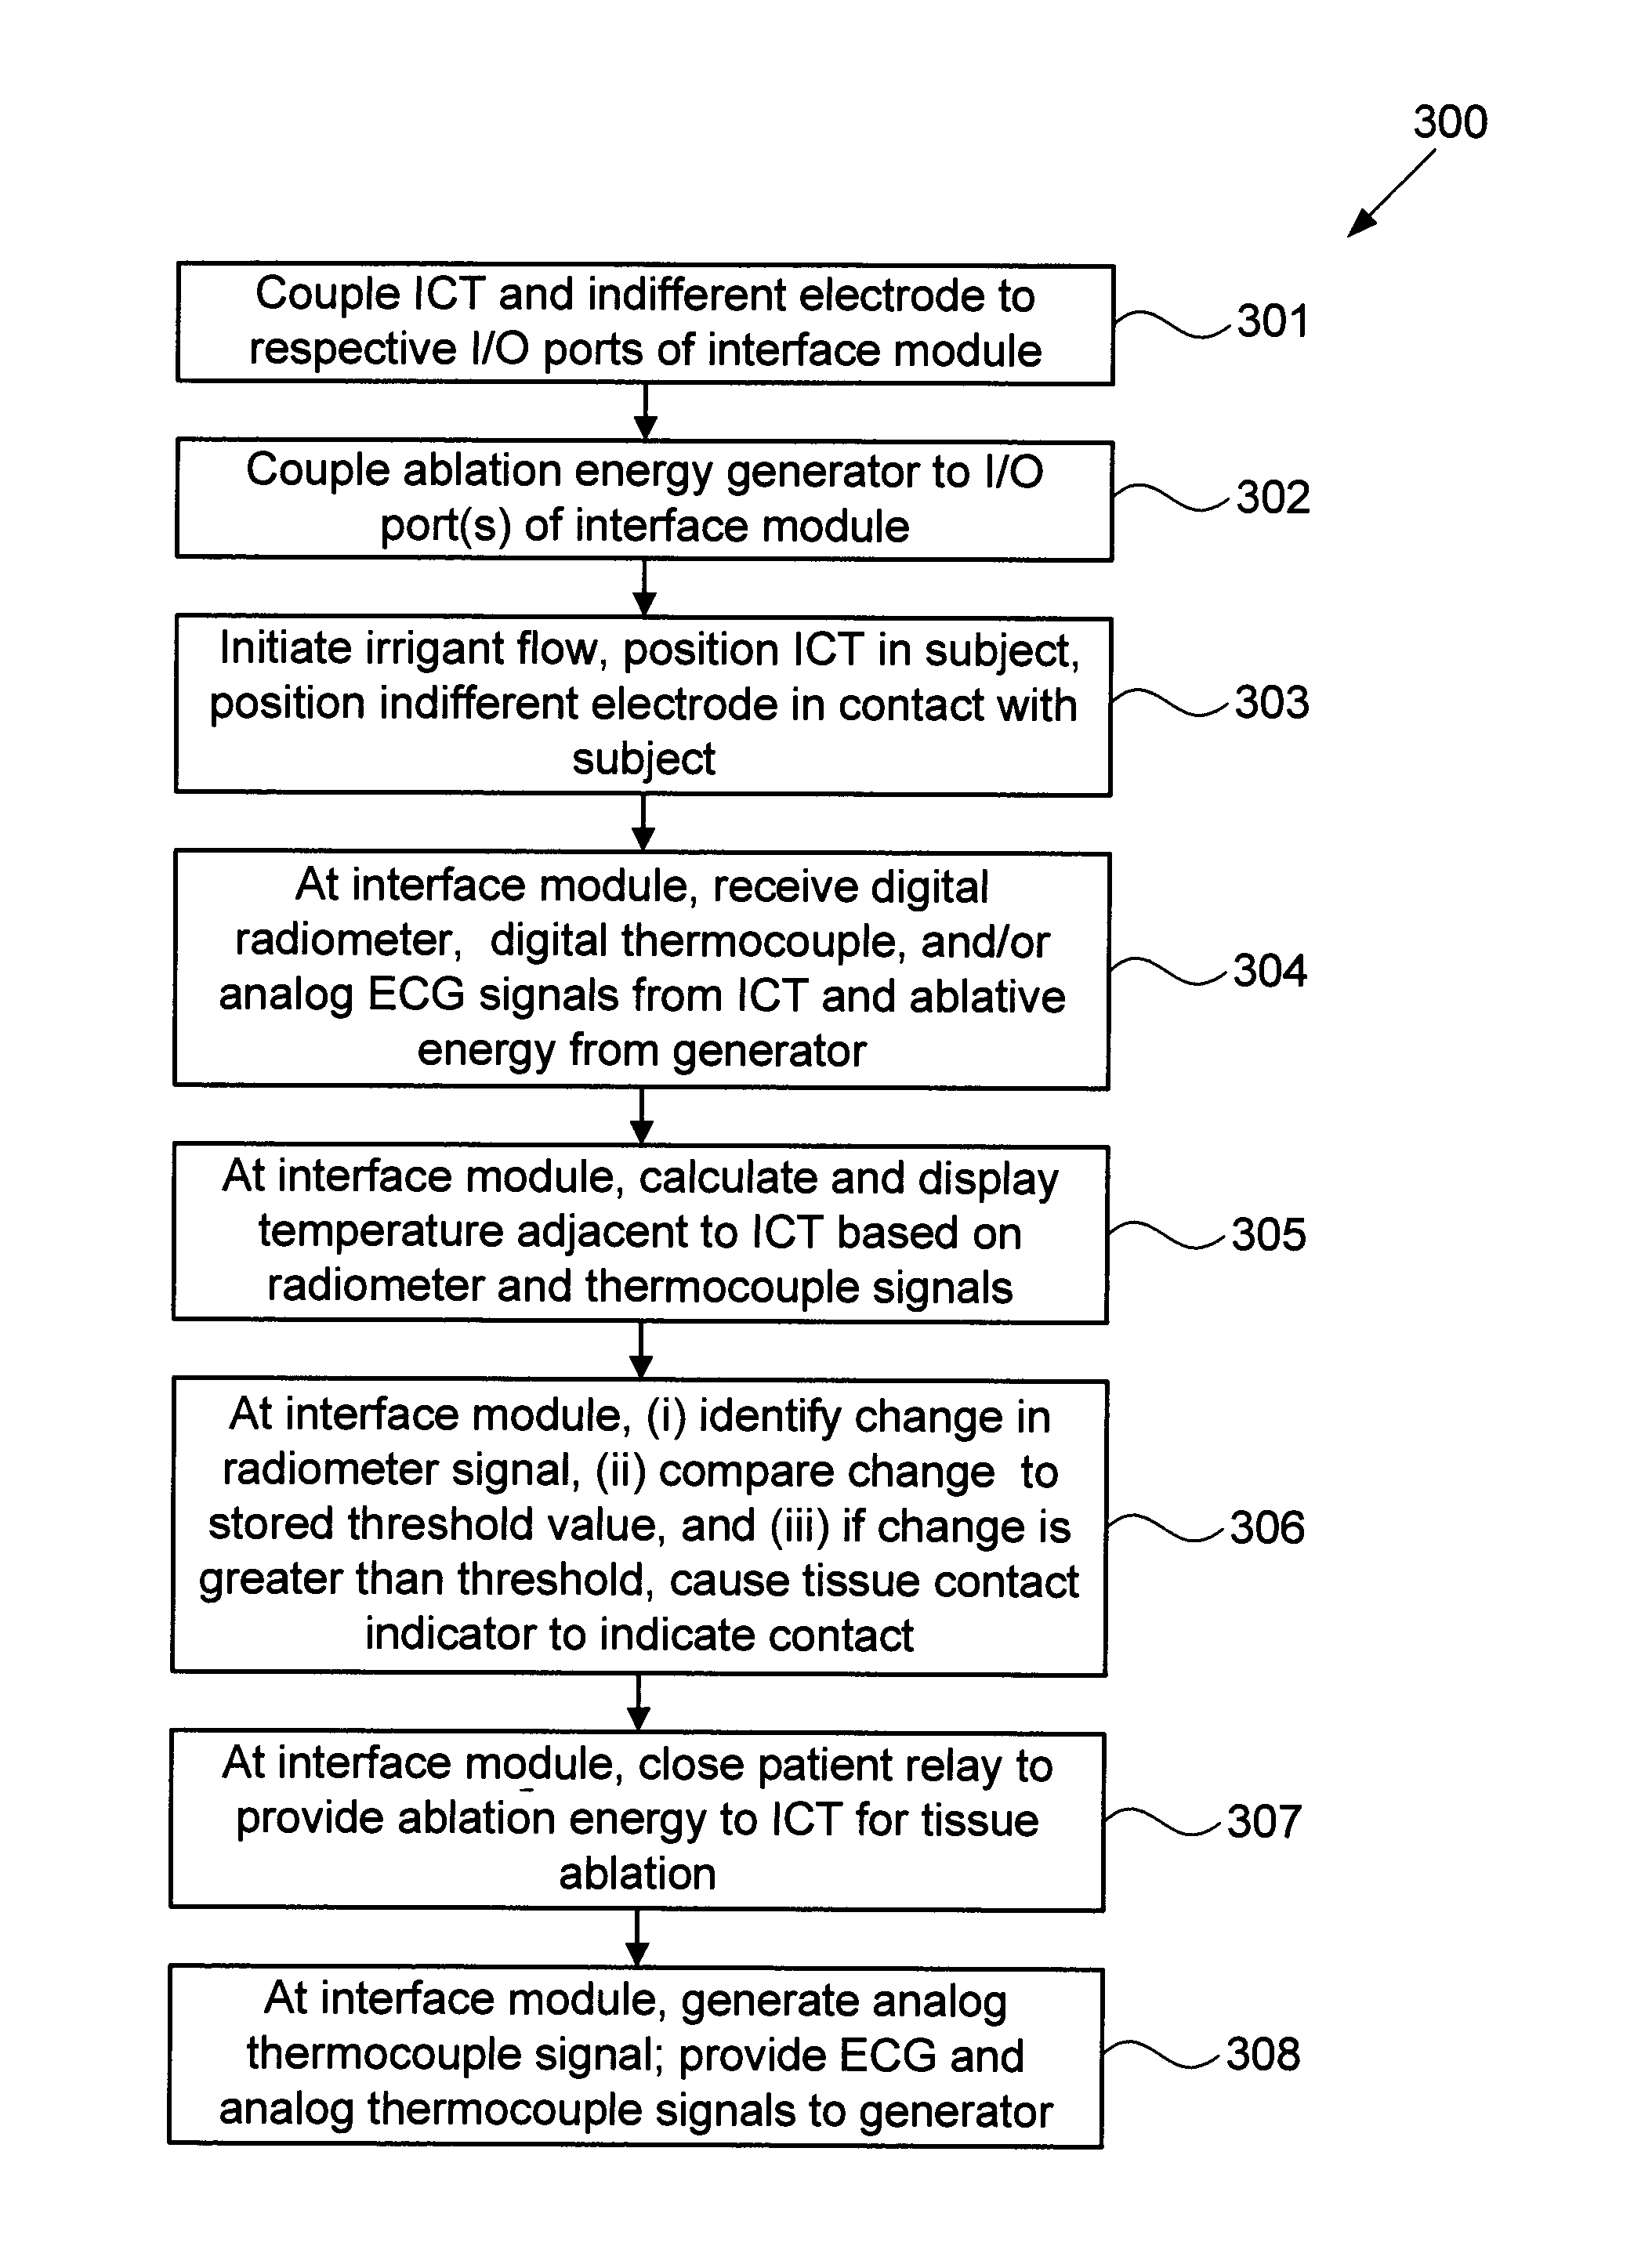 Systems and methods for radiometrically measuring temperature and detecting tissue contact prior to and during tissue ablation